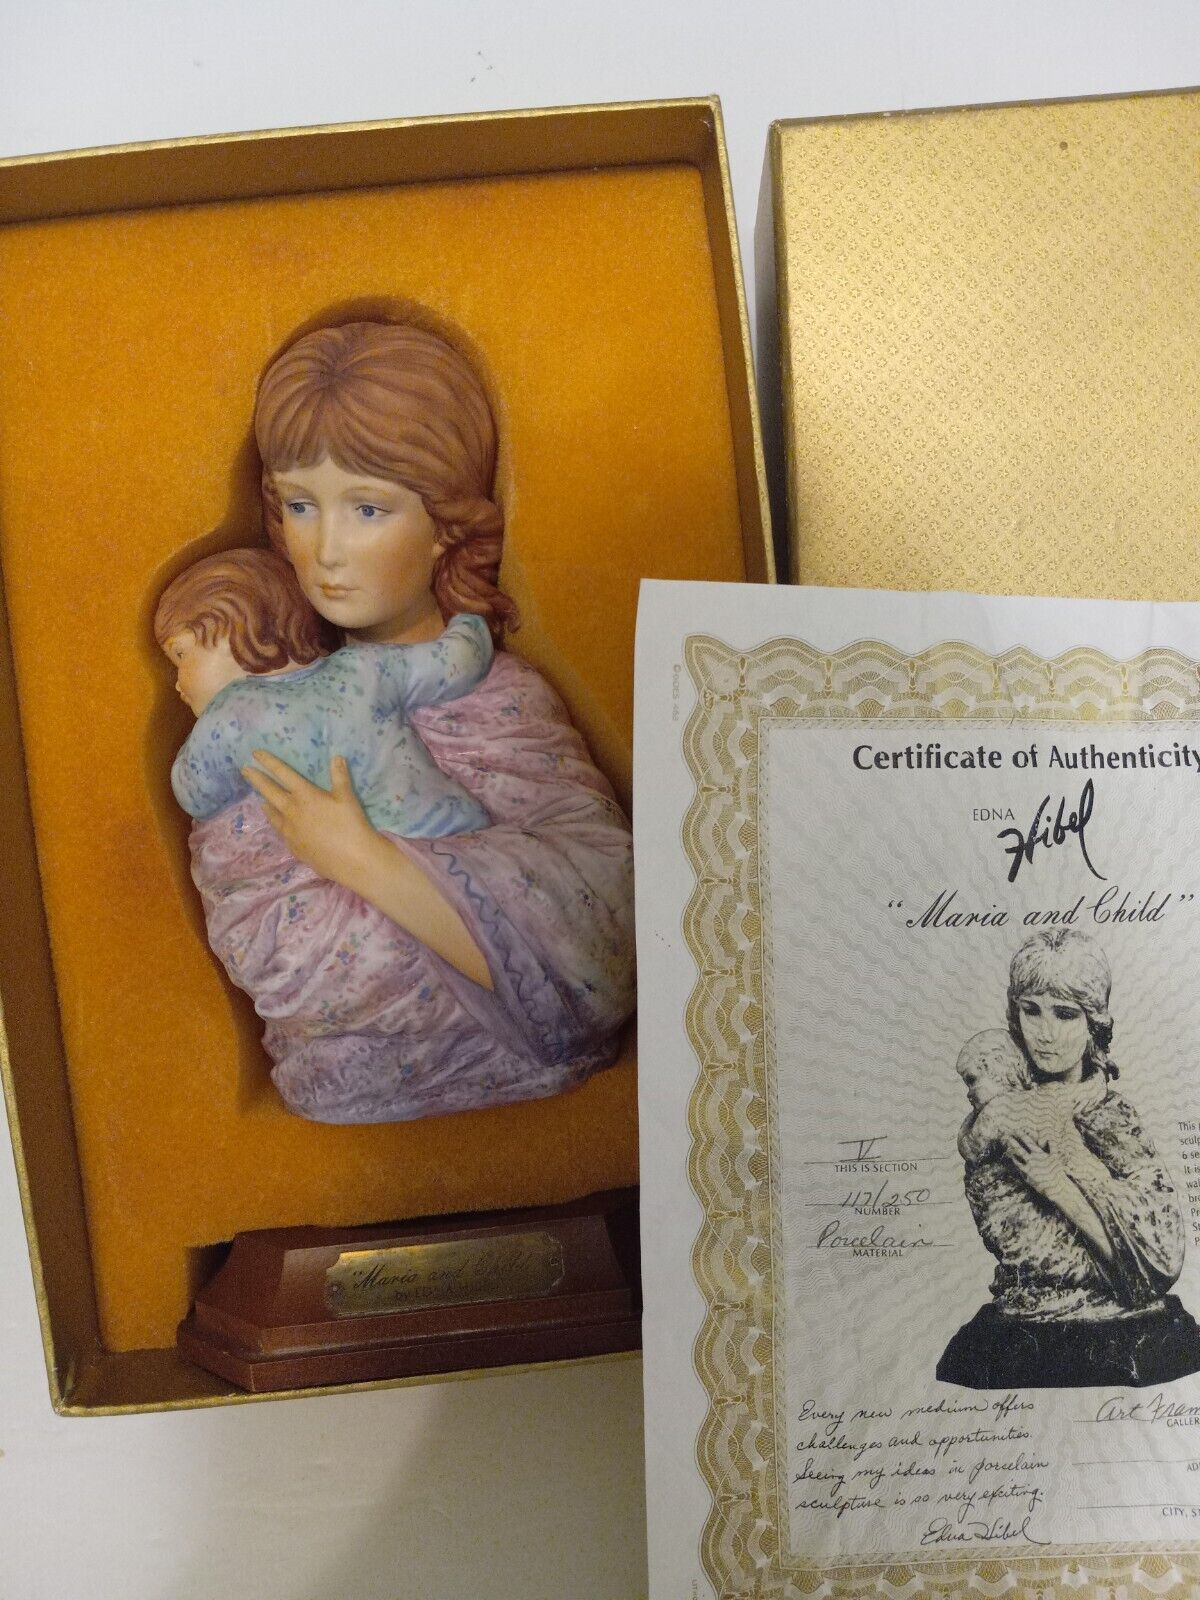 HIBEL MARIA AND CHILD PORCELAIN SCULPTURE CERTIFICATE OF AUTHENTICITY NEW INBOX